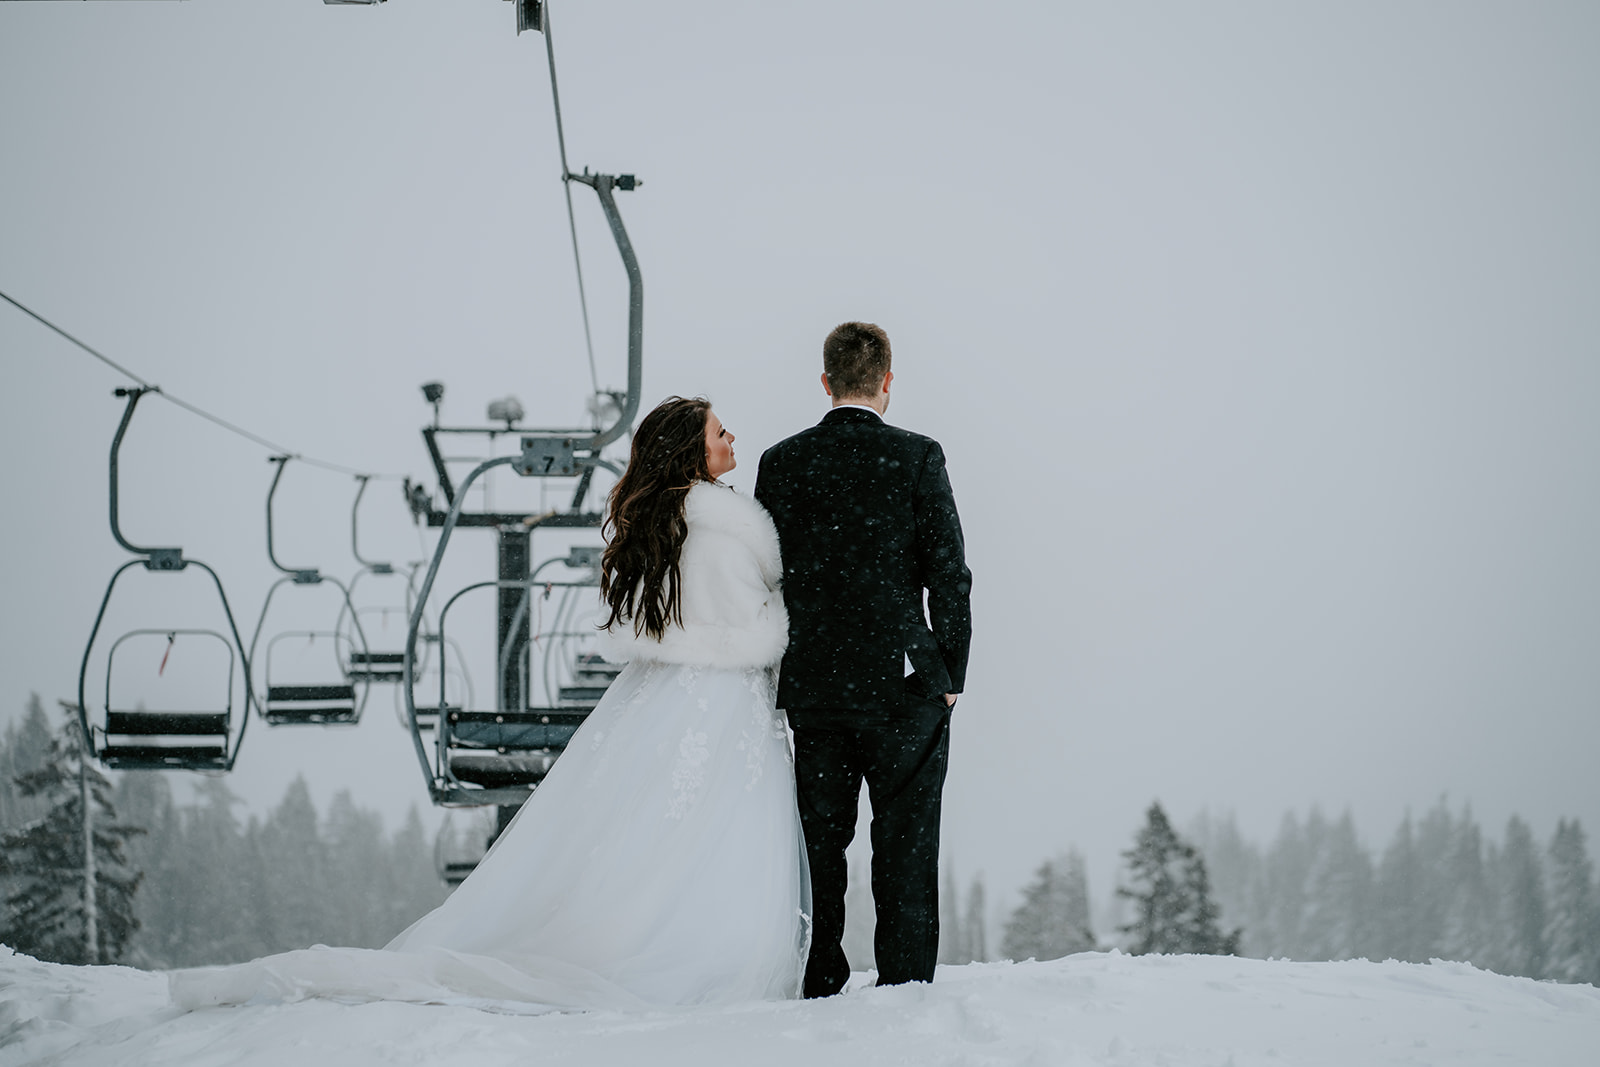 Bride and groom at ski lifts at Timberline Lodge during a snowstorm on their wedding day.